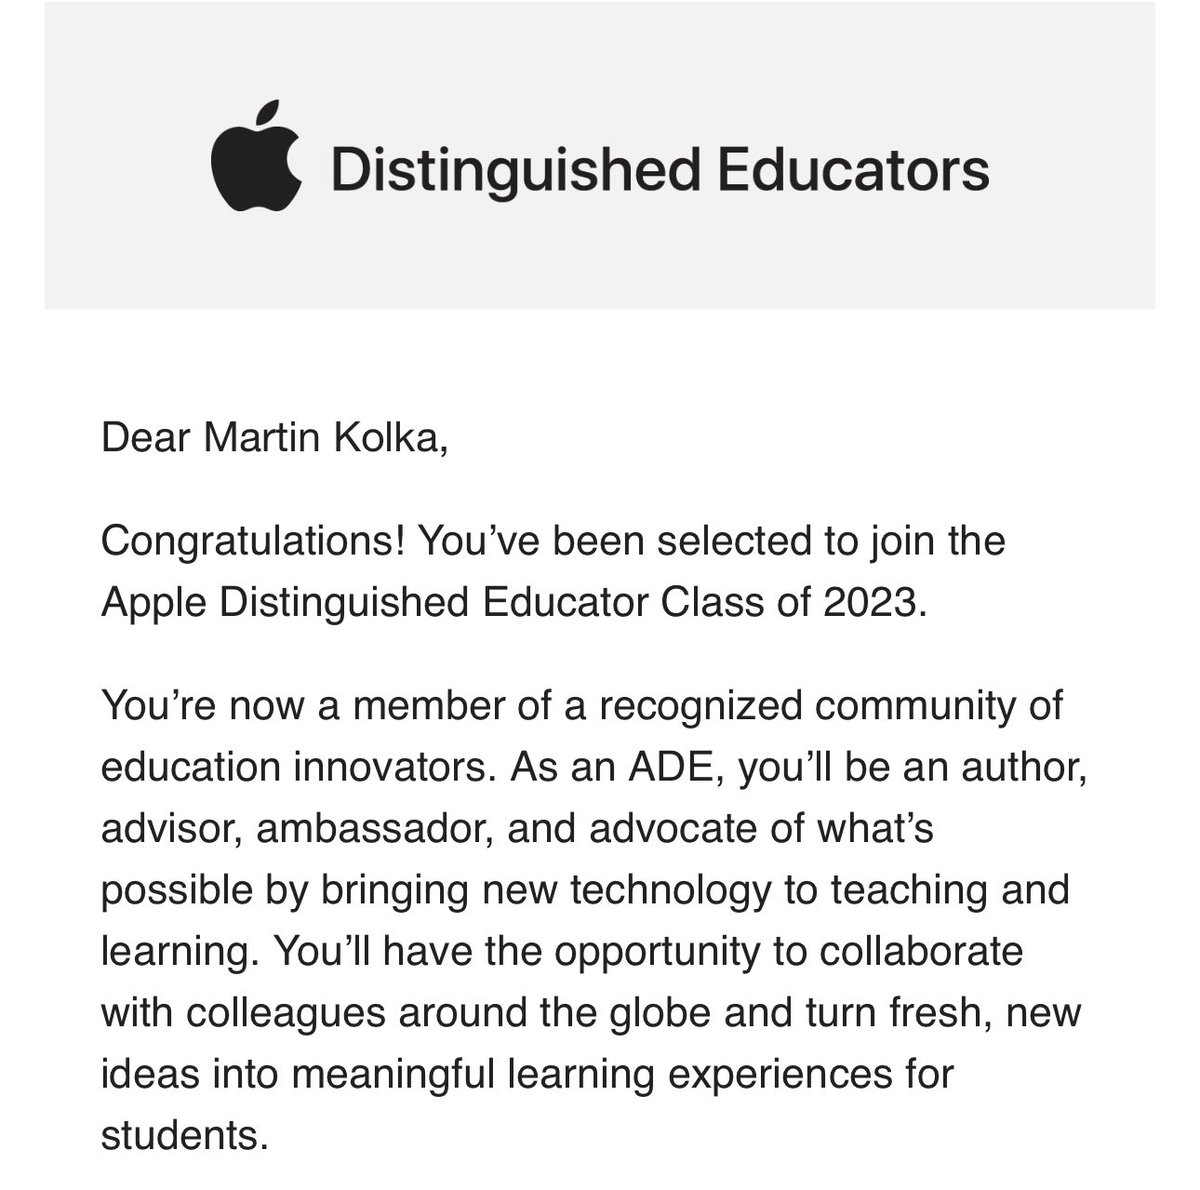 Very excited to have been selected for the ADE class of 2023! #ade2023